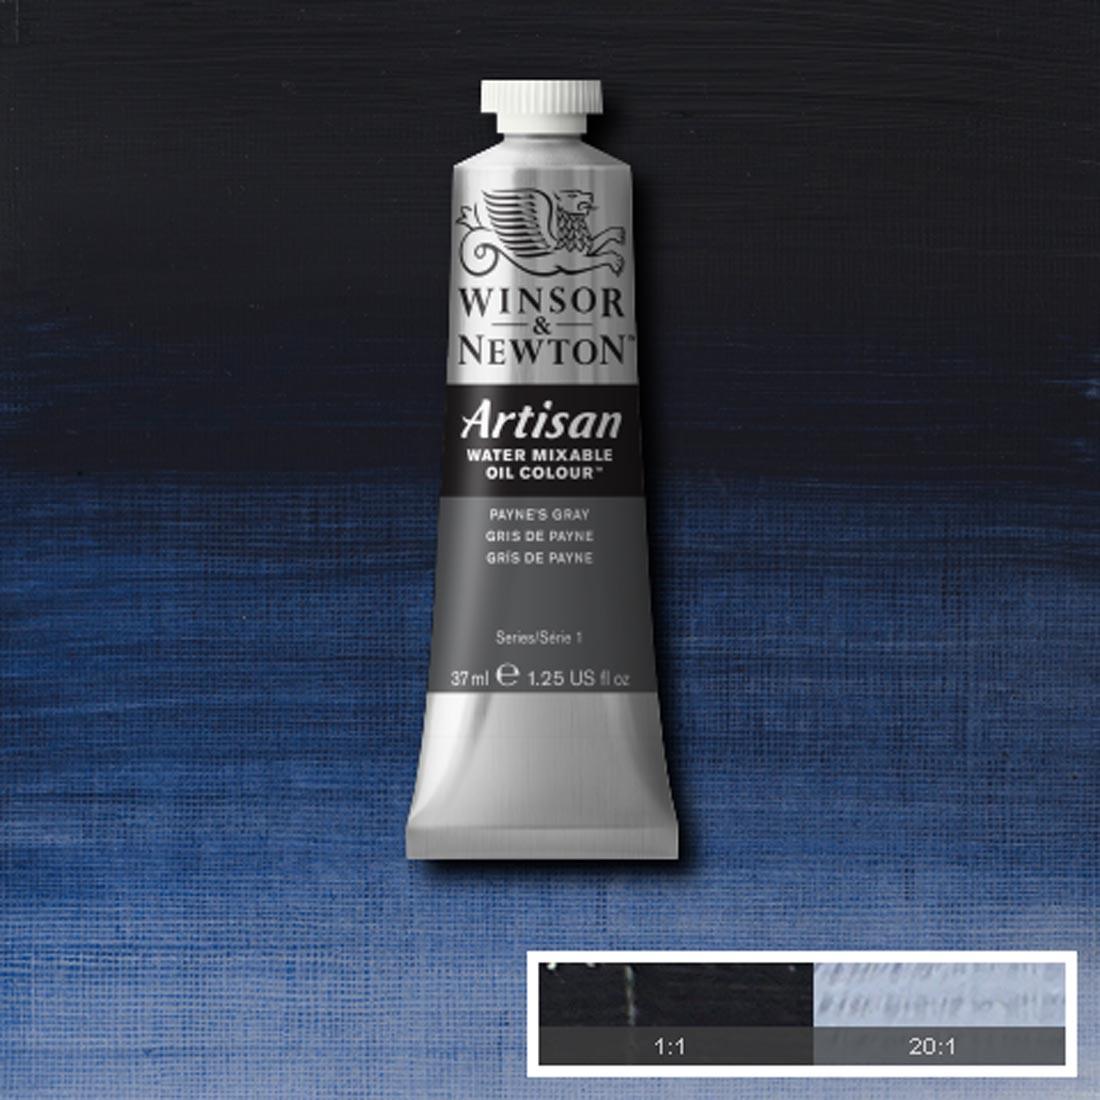 Tube of Payne's Gray Winsor & Newton Artisan Water Mixable Oil Colour with a paint swatch for the background